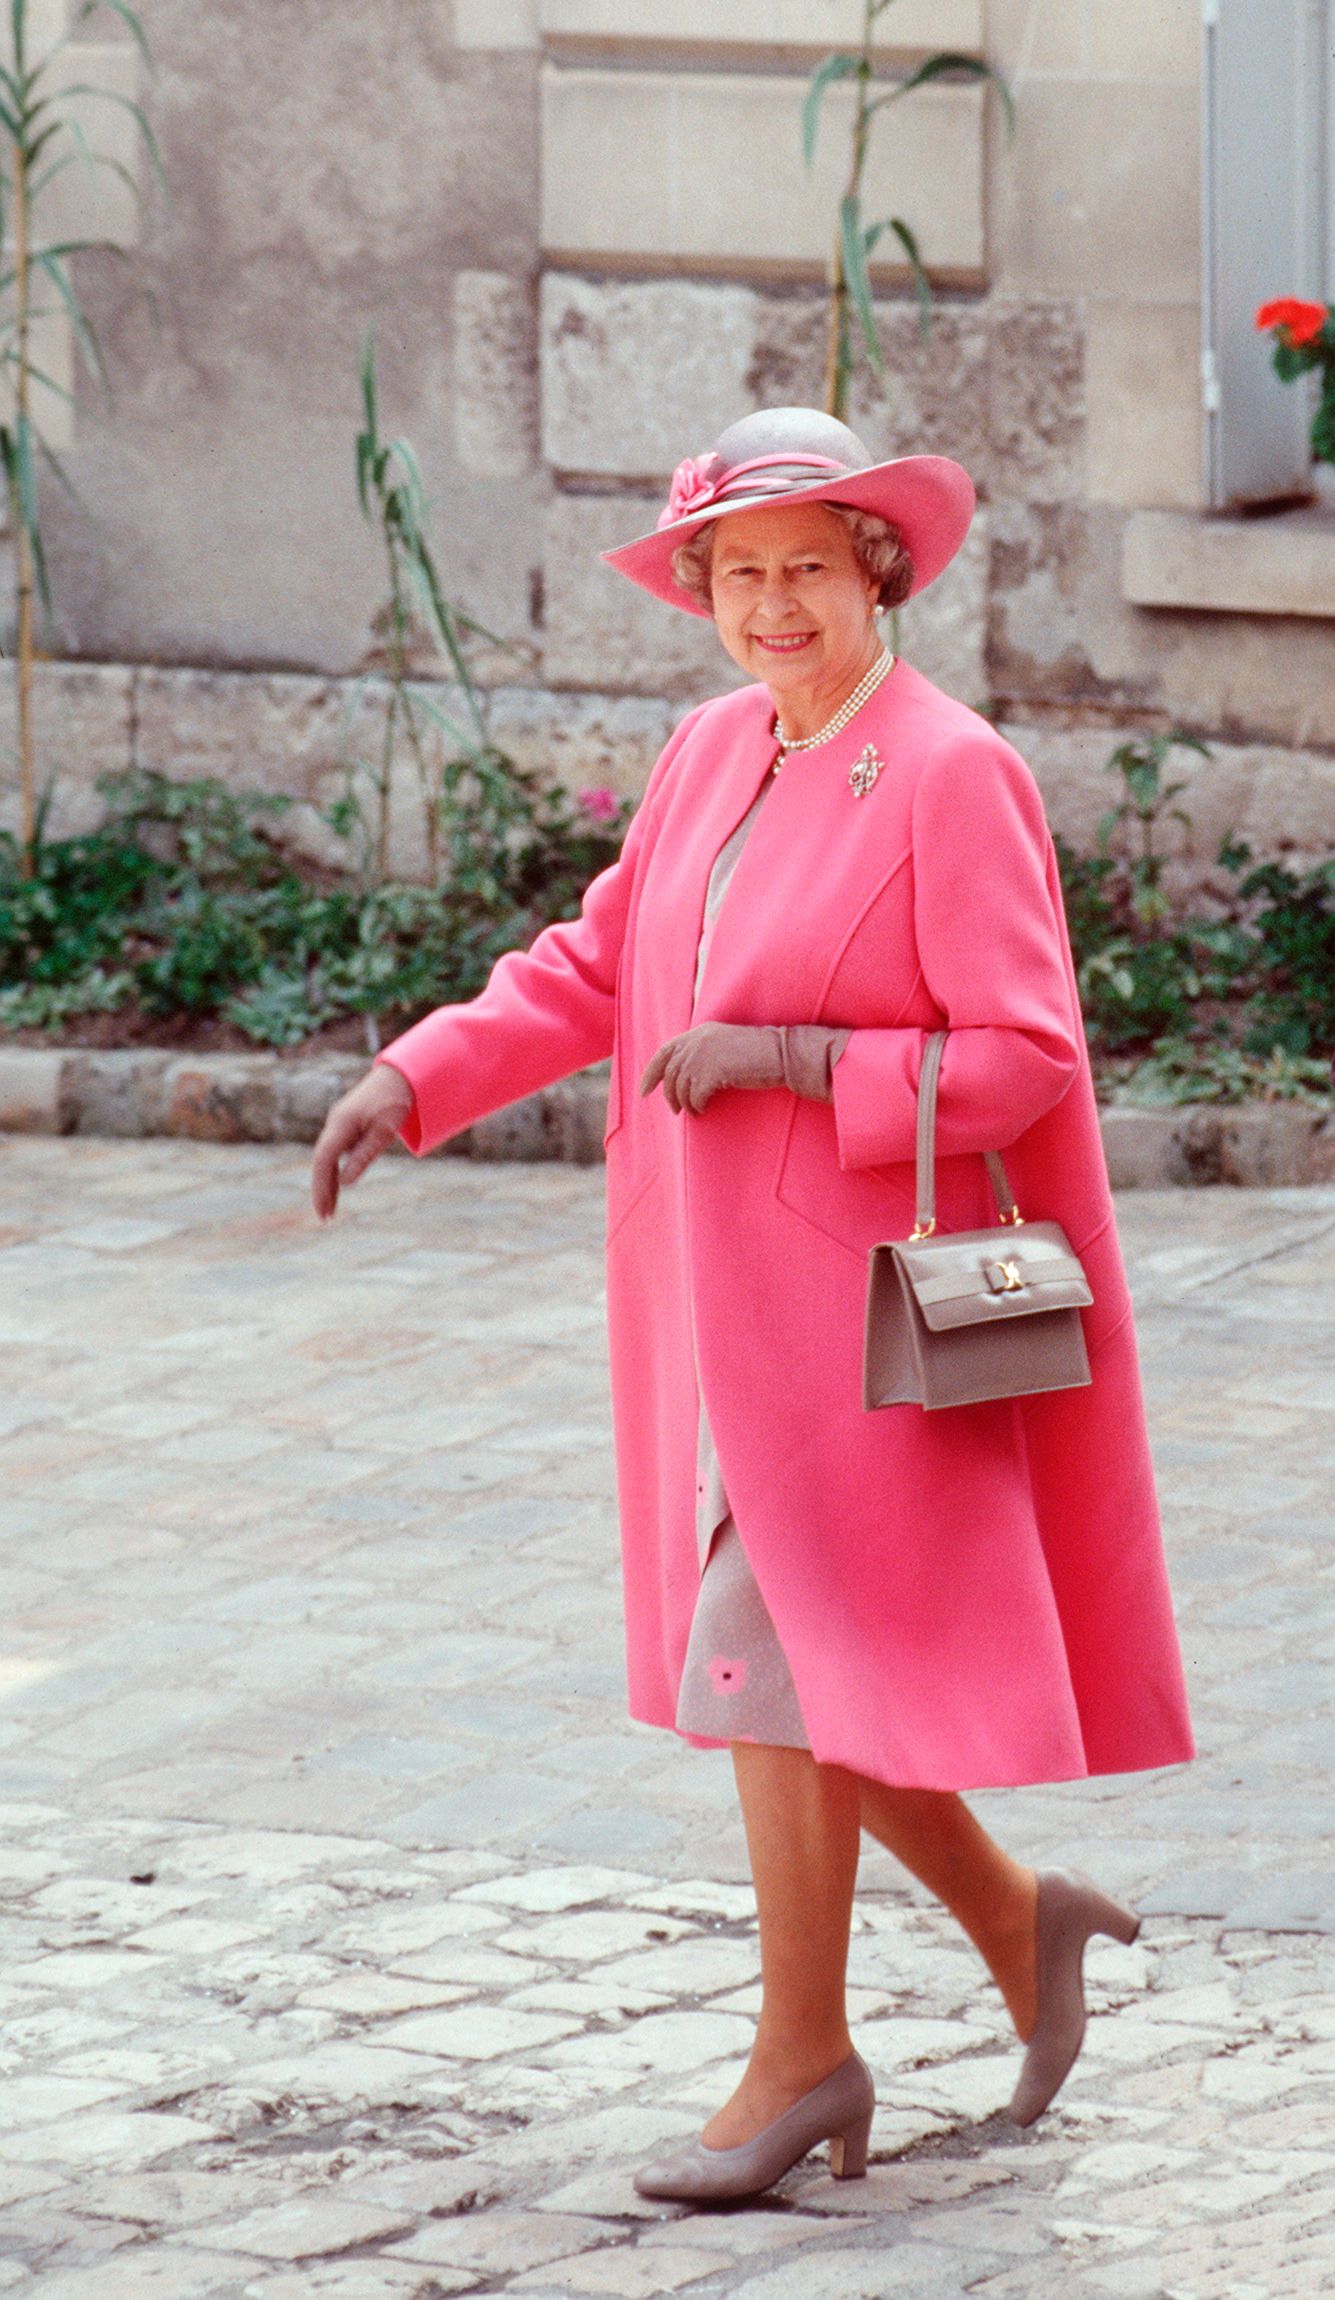 The Queen on a visit to Blois in France on June 11, 1992 | Photo: Tim Graham Photo Library/Getty Images